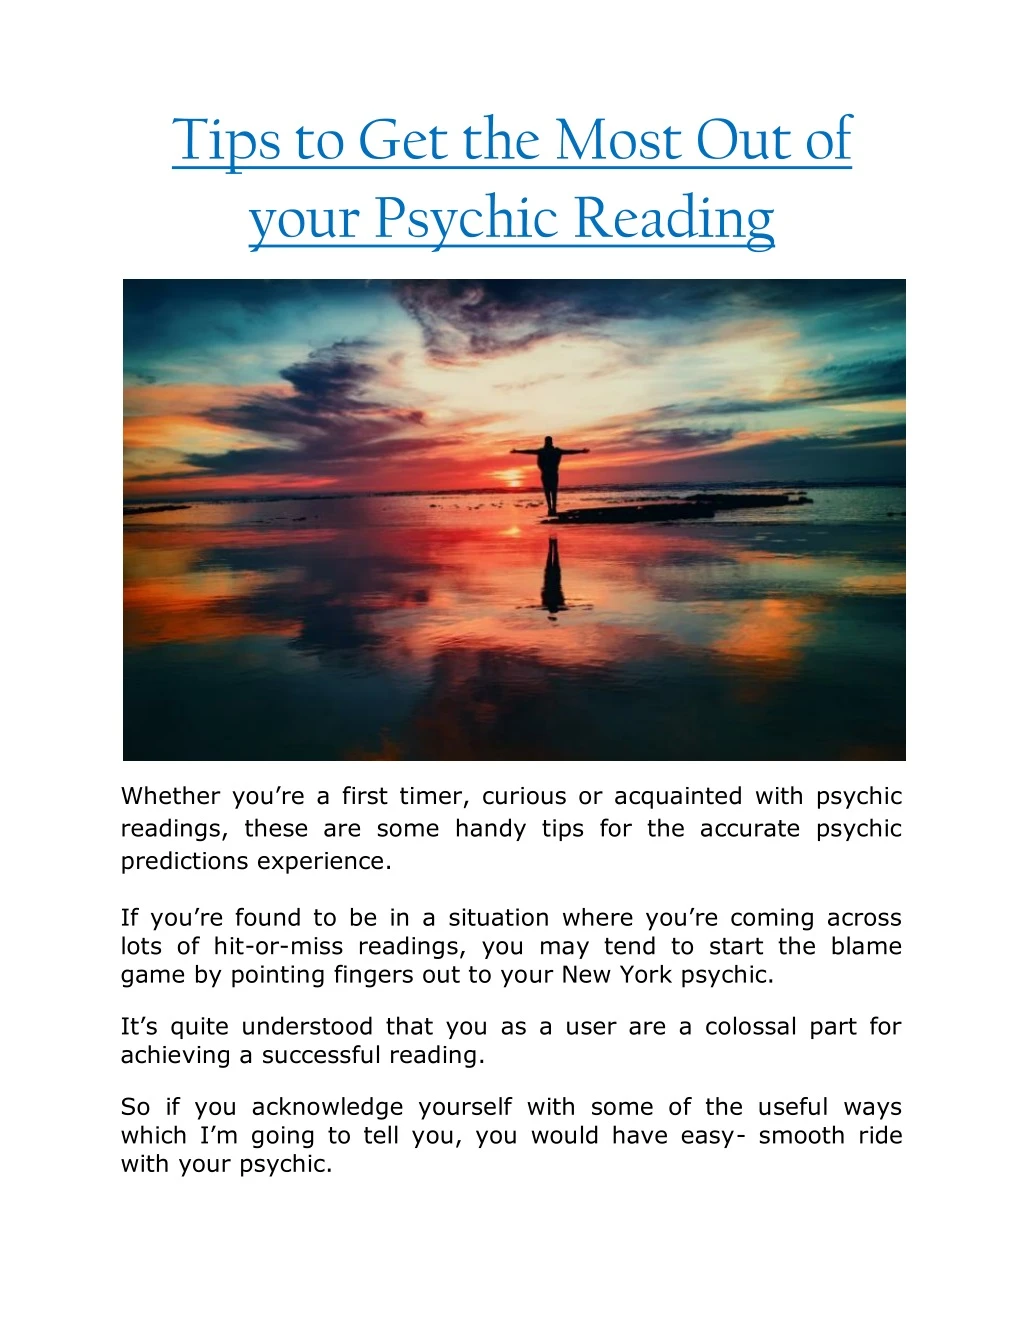 tips to get the most out of your psychic reading